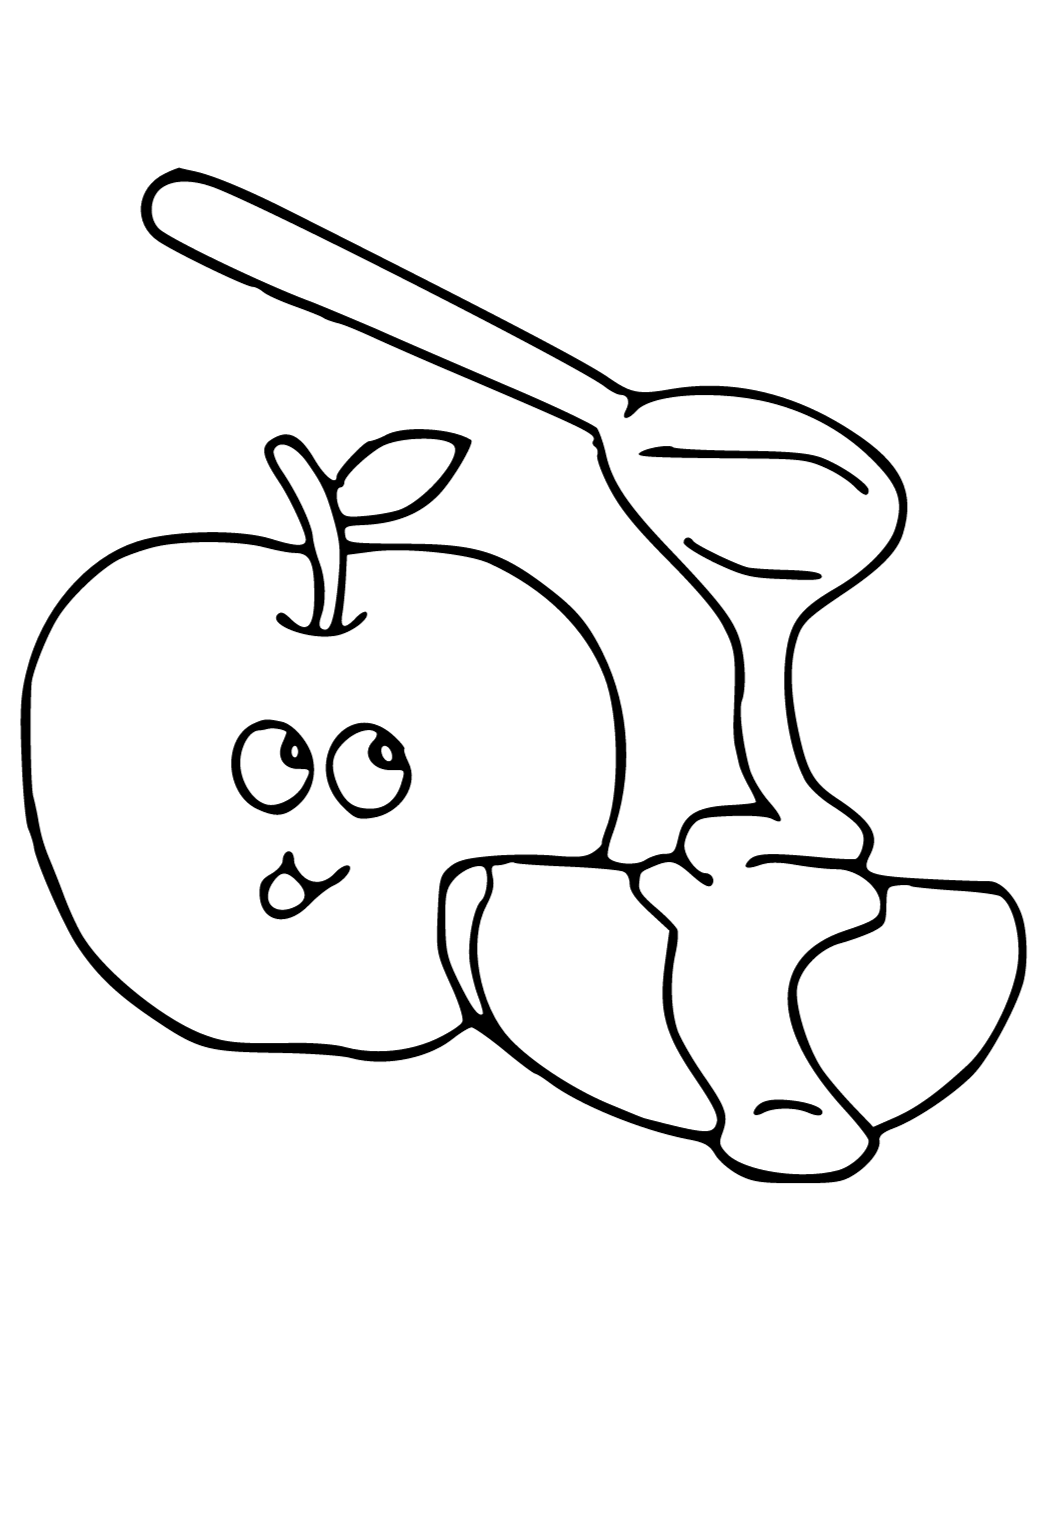 Free printable rosh hashanah apple coloring page for adults and kids